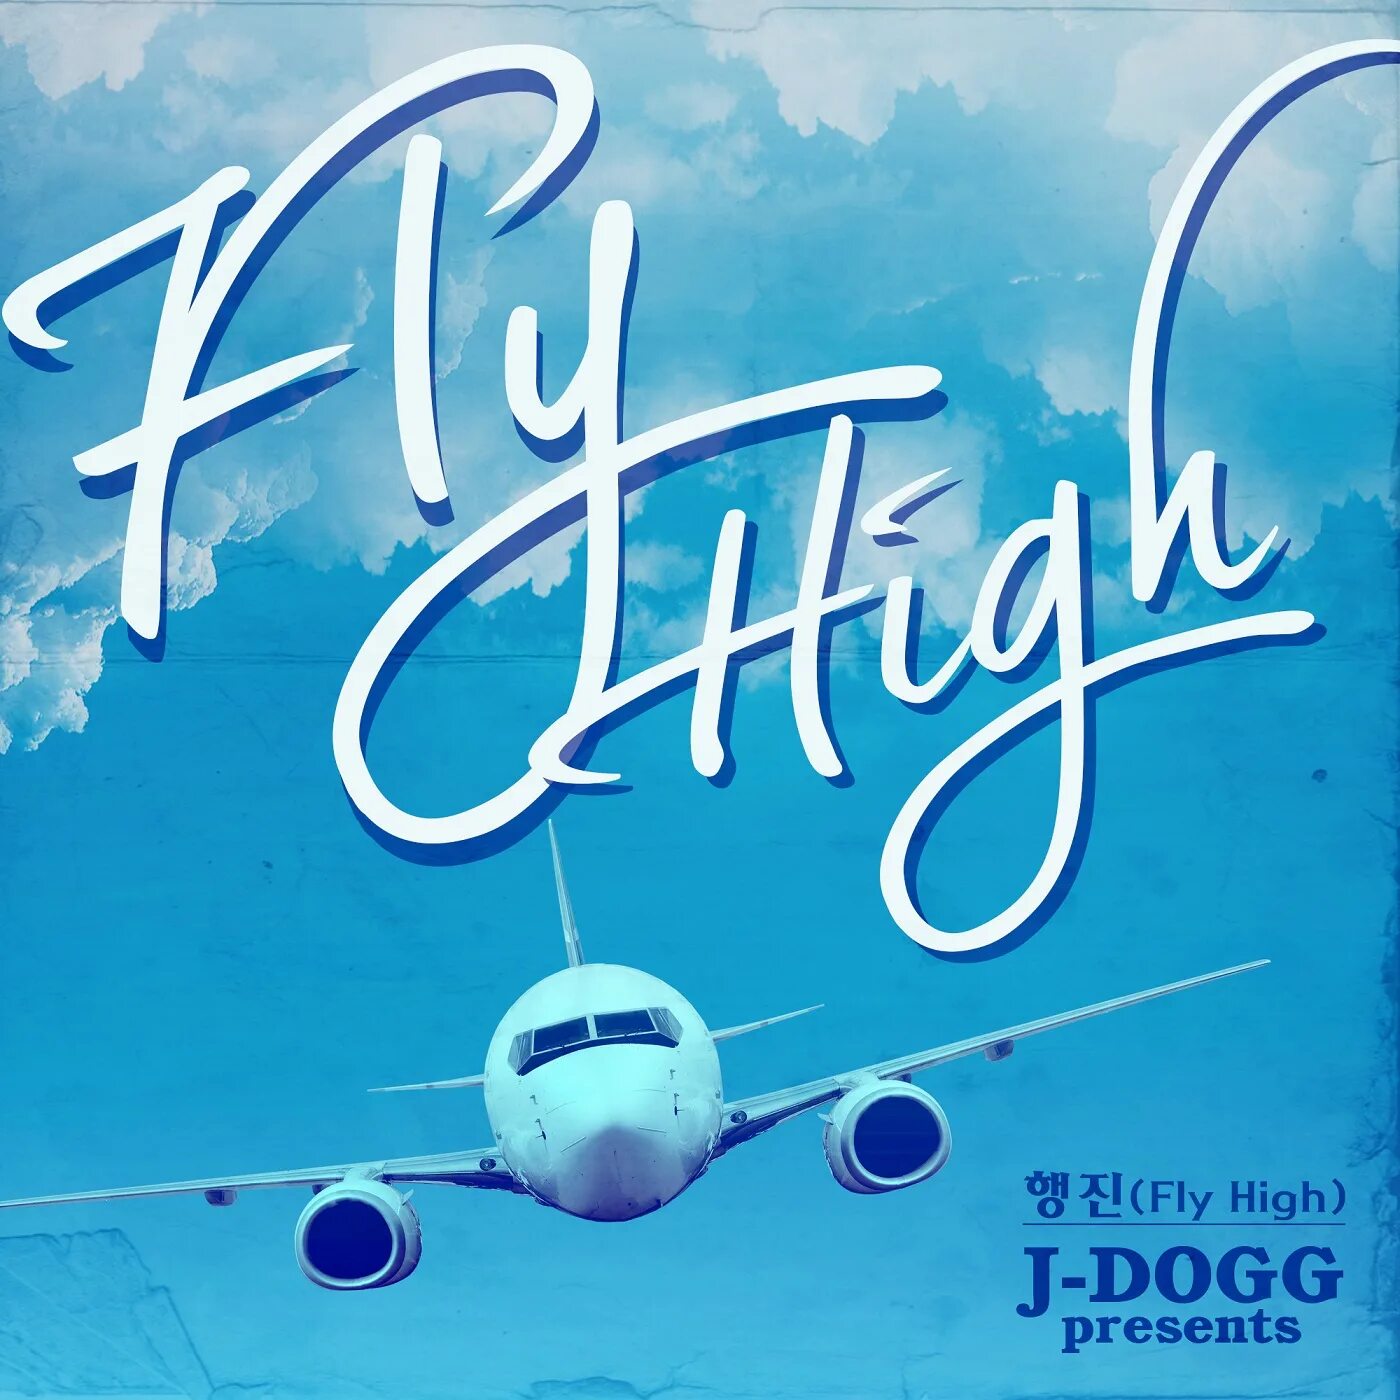 Fly High. Fly High activity book. Fly High 1. Fly High 2. Fly high review